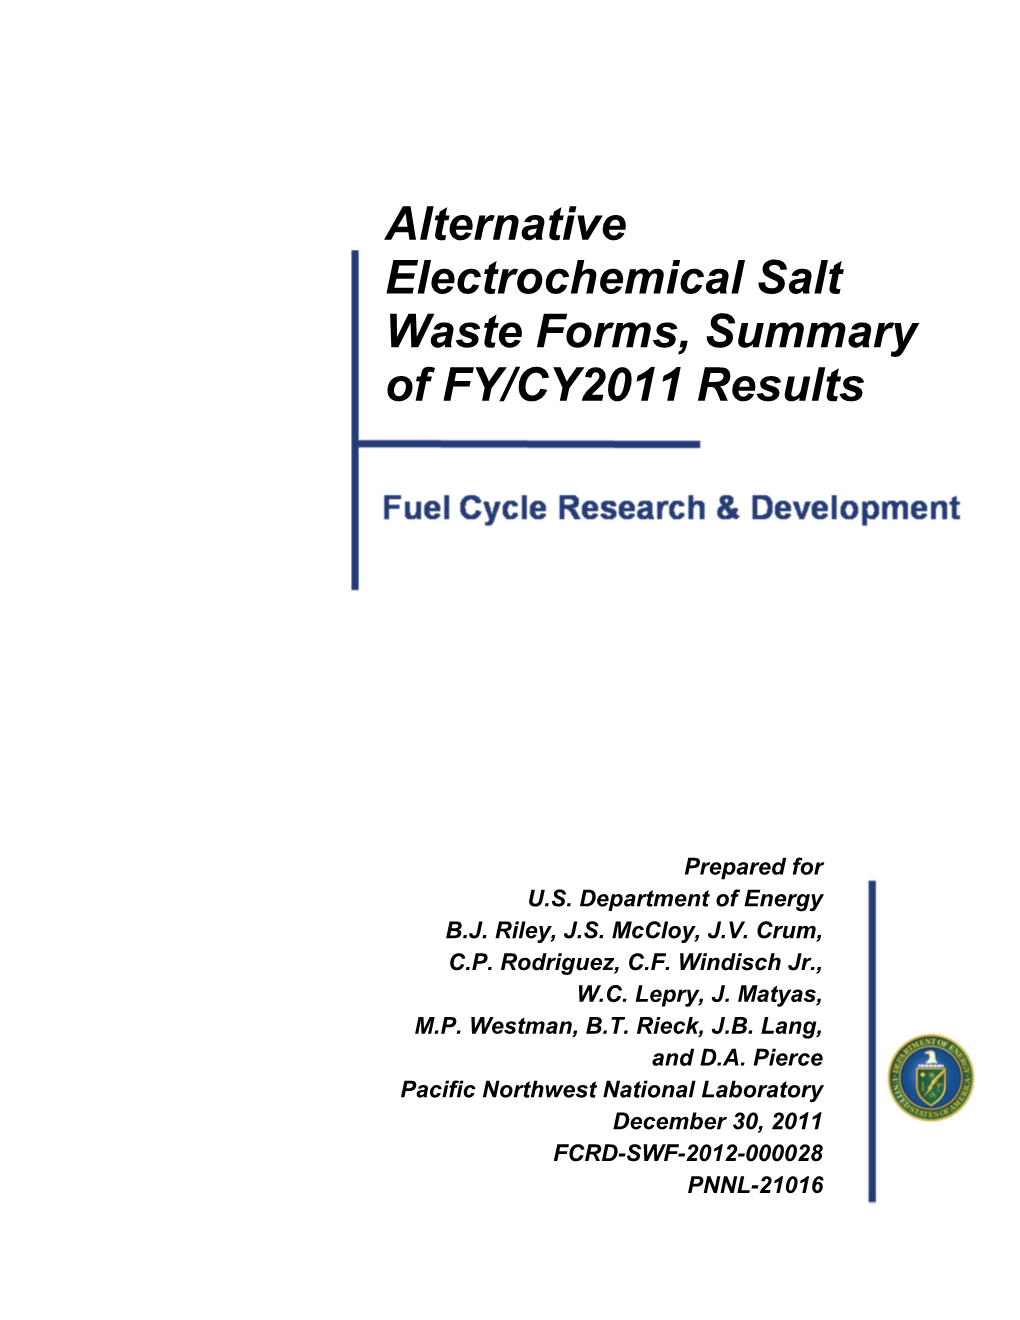 Alternative Electrochemical Salt Waste Forms, Summary of FY/CY2011 Results